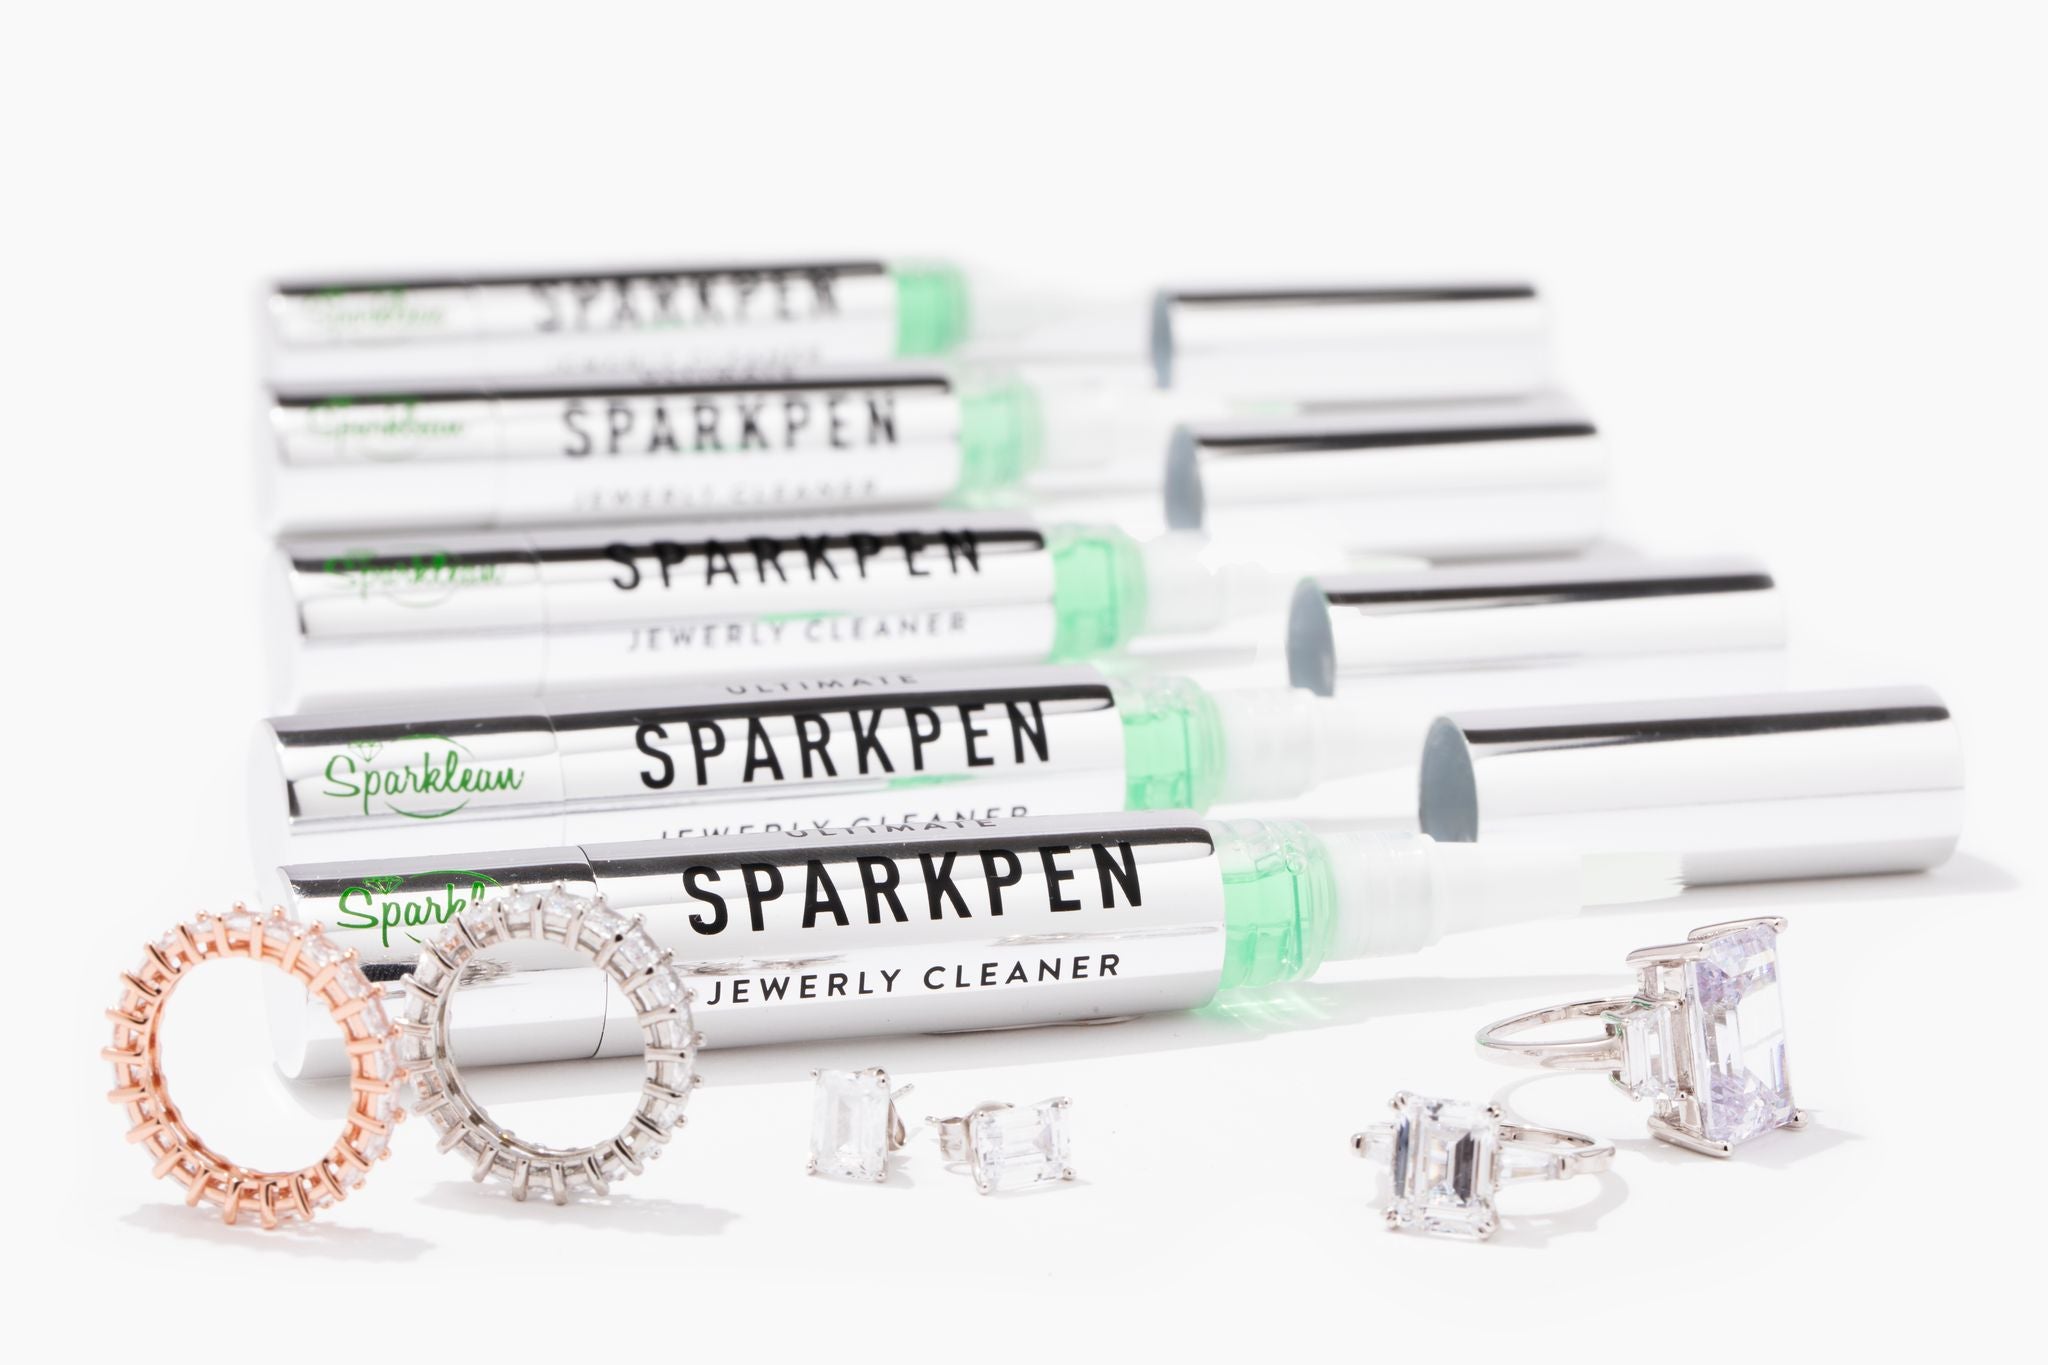 eep Your Jewelry Looking Like New with Sparklean Sparkpen Cleaner - Natural  and Non-Abrasive